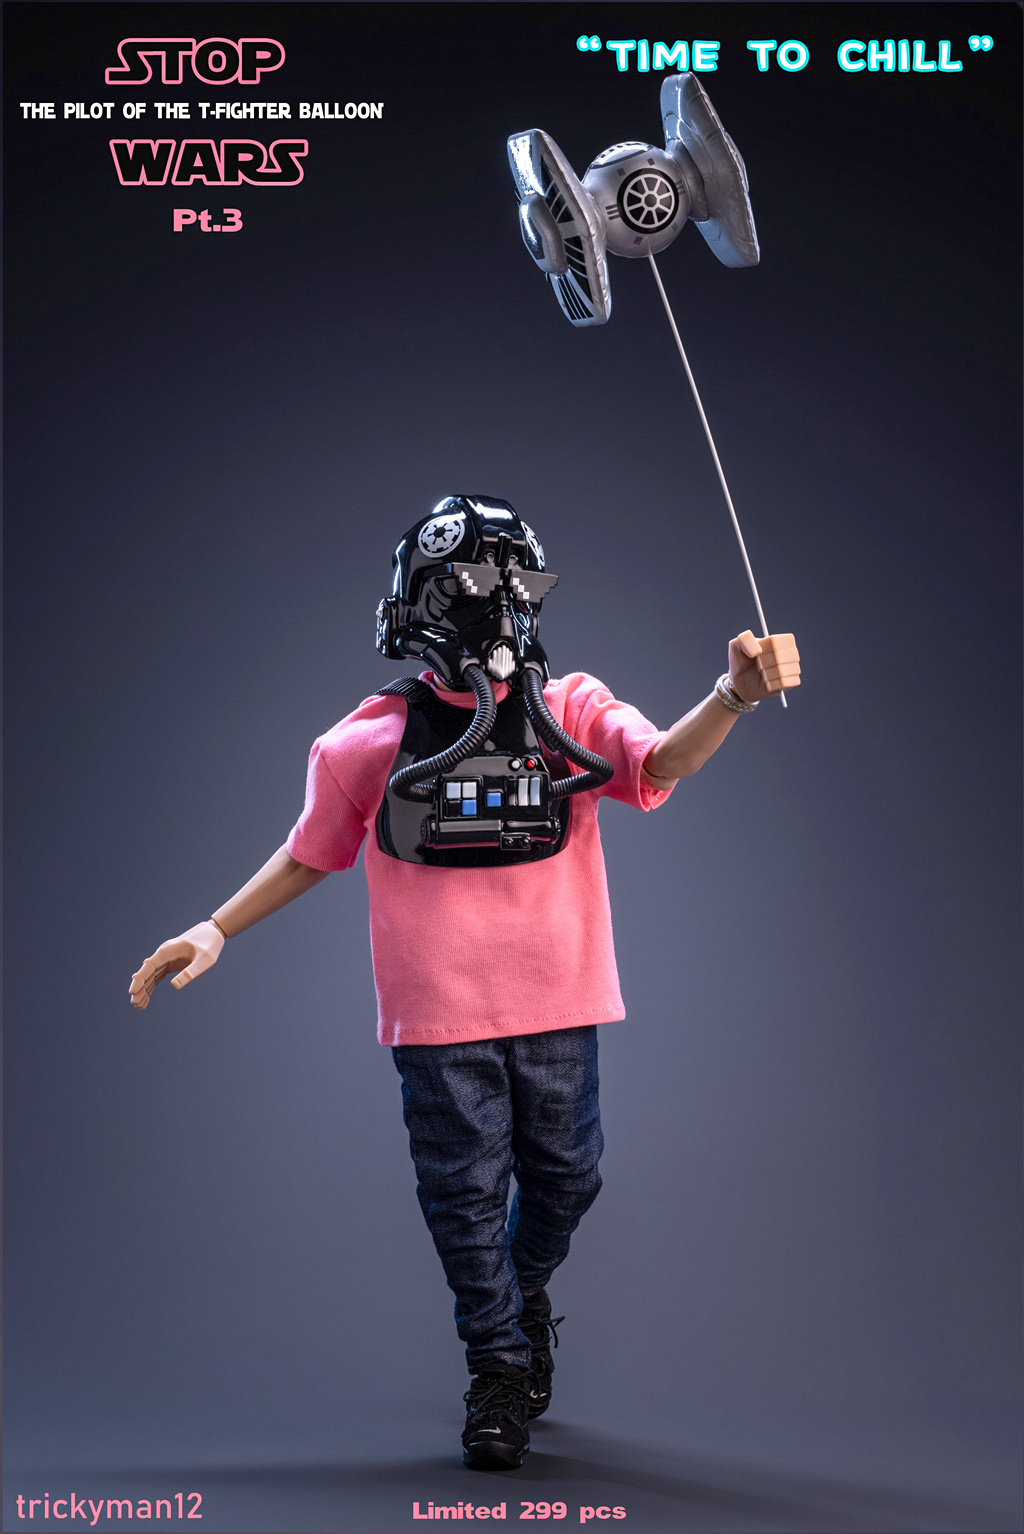 stylized - NEW PRODUCT: STOPWARS Pt.3: 1/6 scale THE PILOT OF THE T-FIGHTER BALLOON 16580212